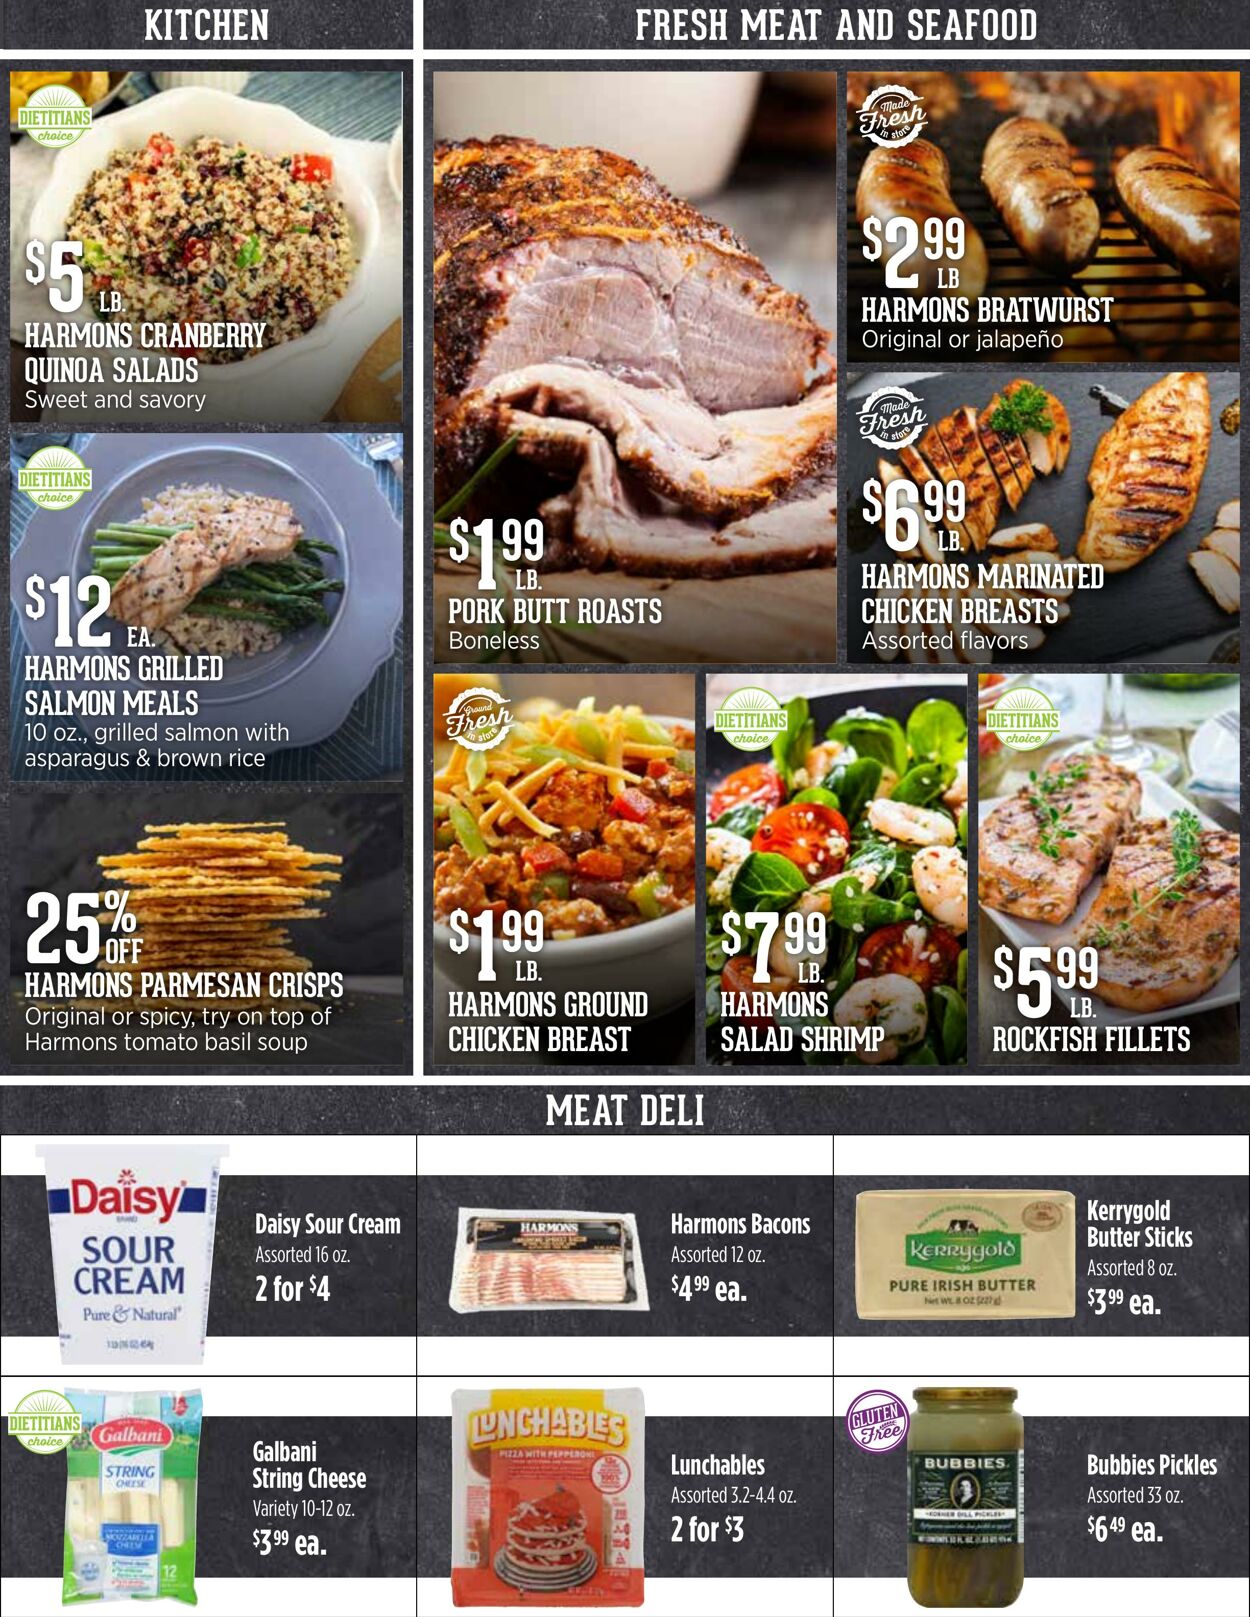 Weekly ad Harmons Grocery 03/21/2023 - 03/27/2023